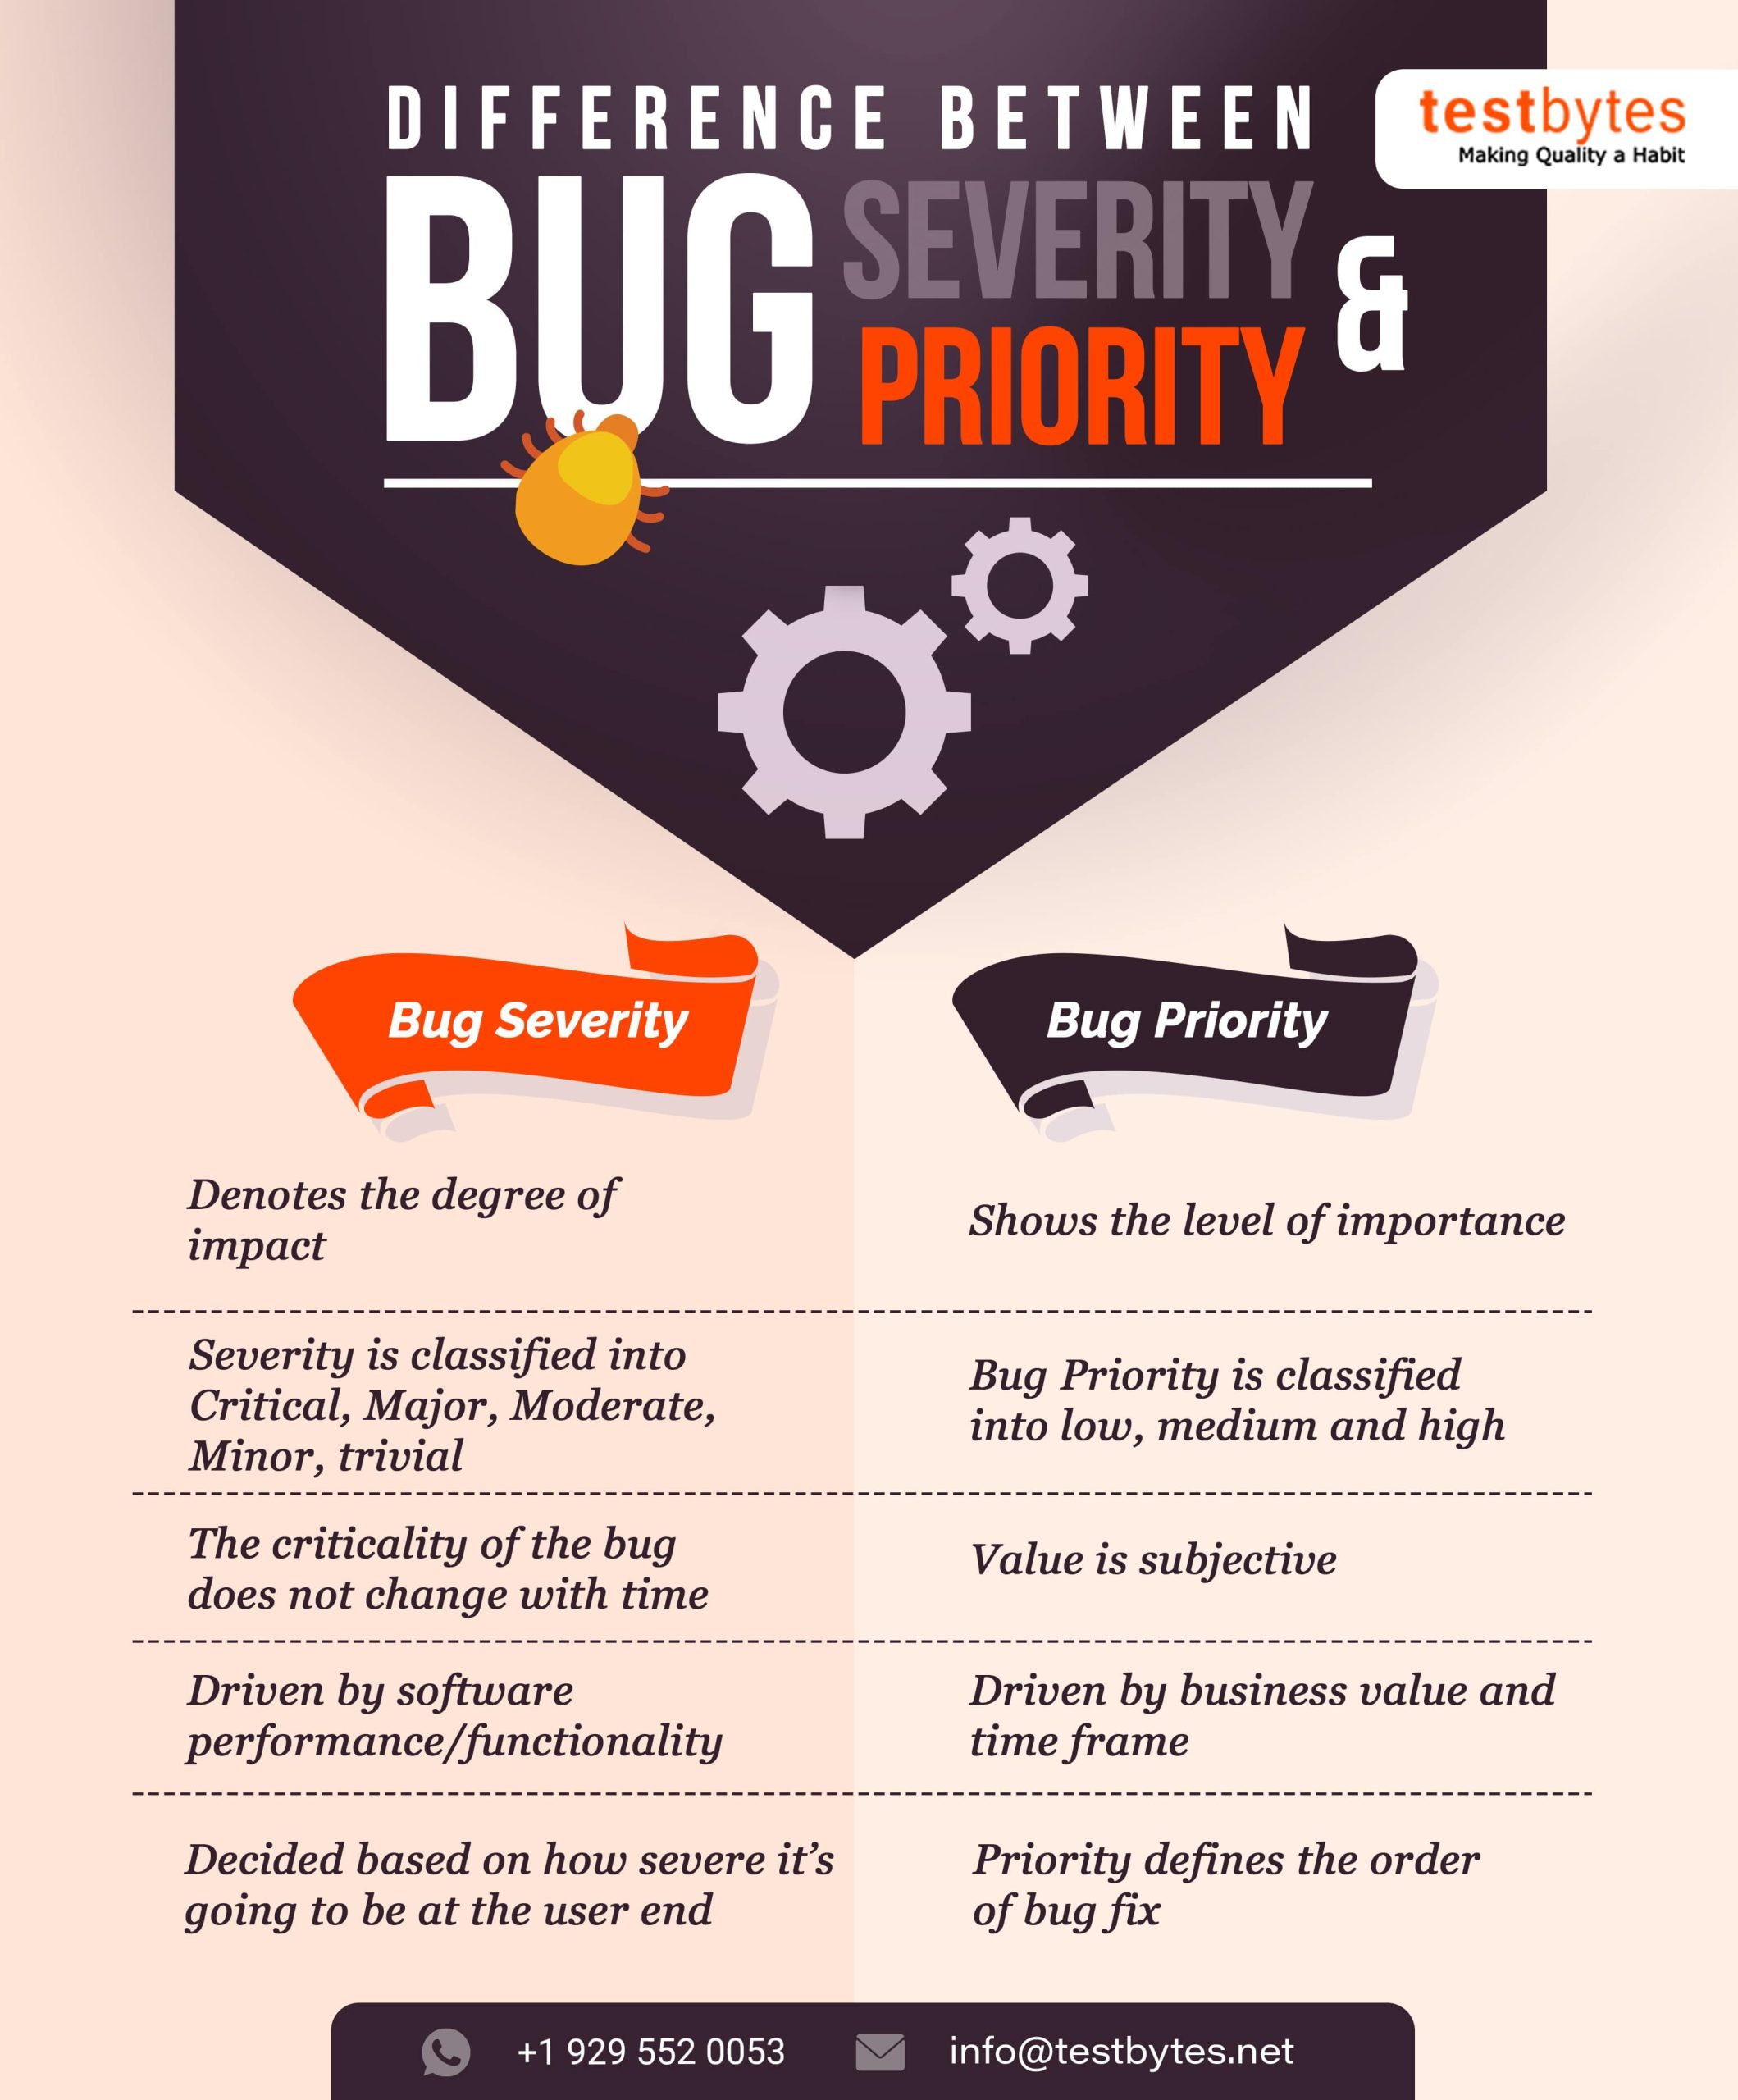 Difference between bug severity and bug priority